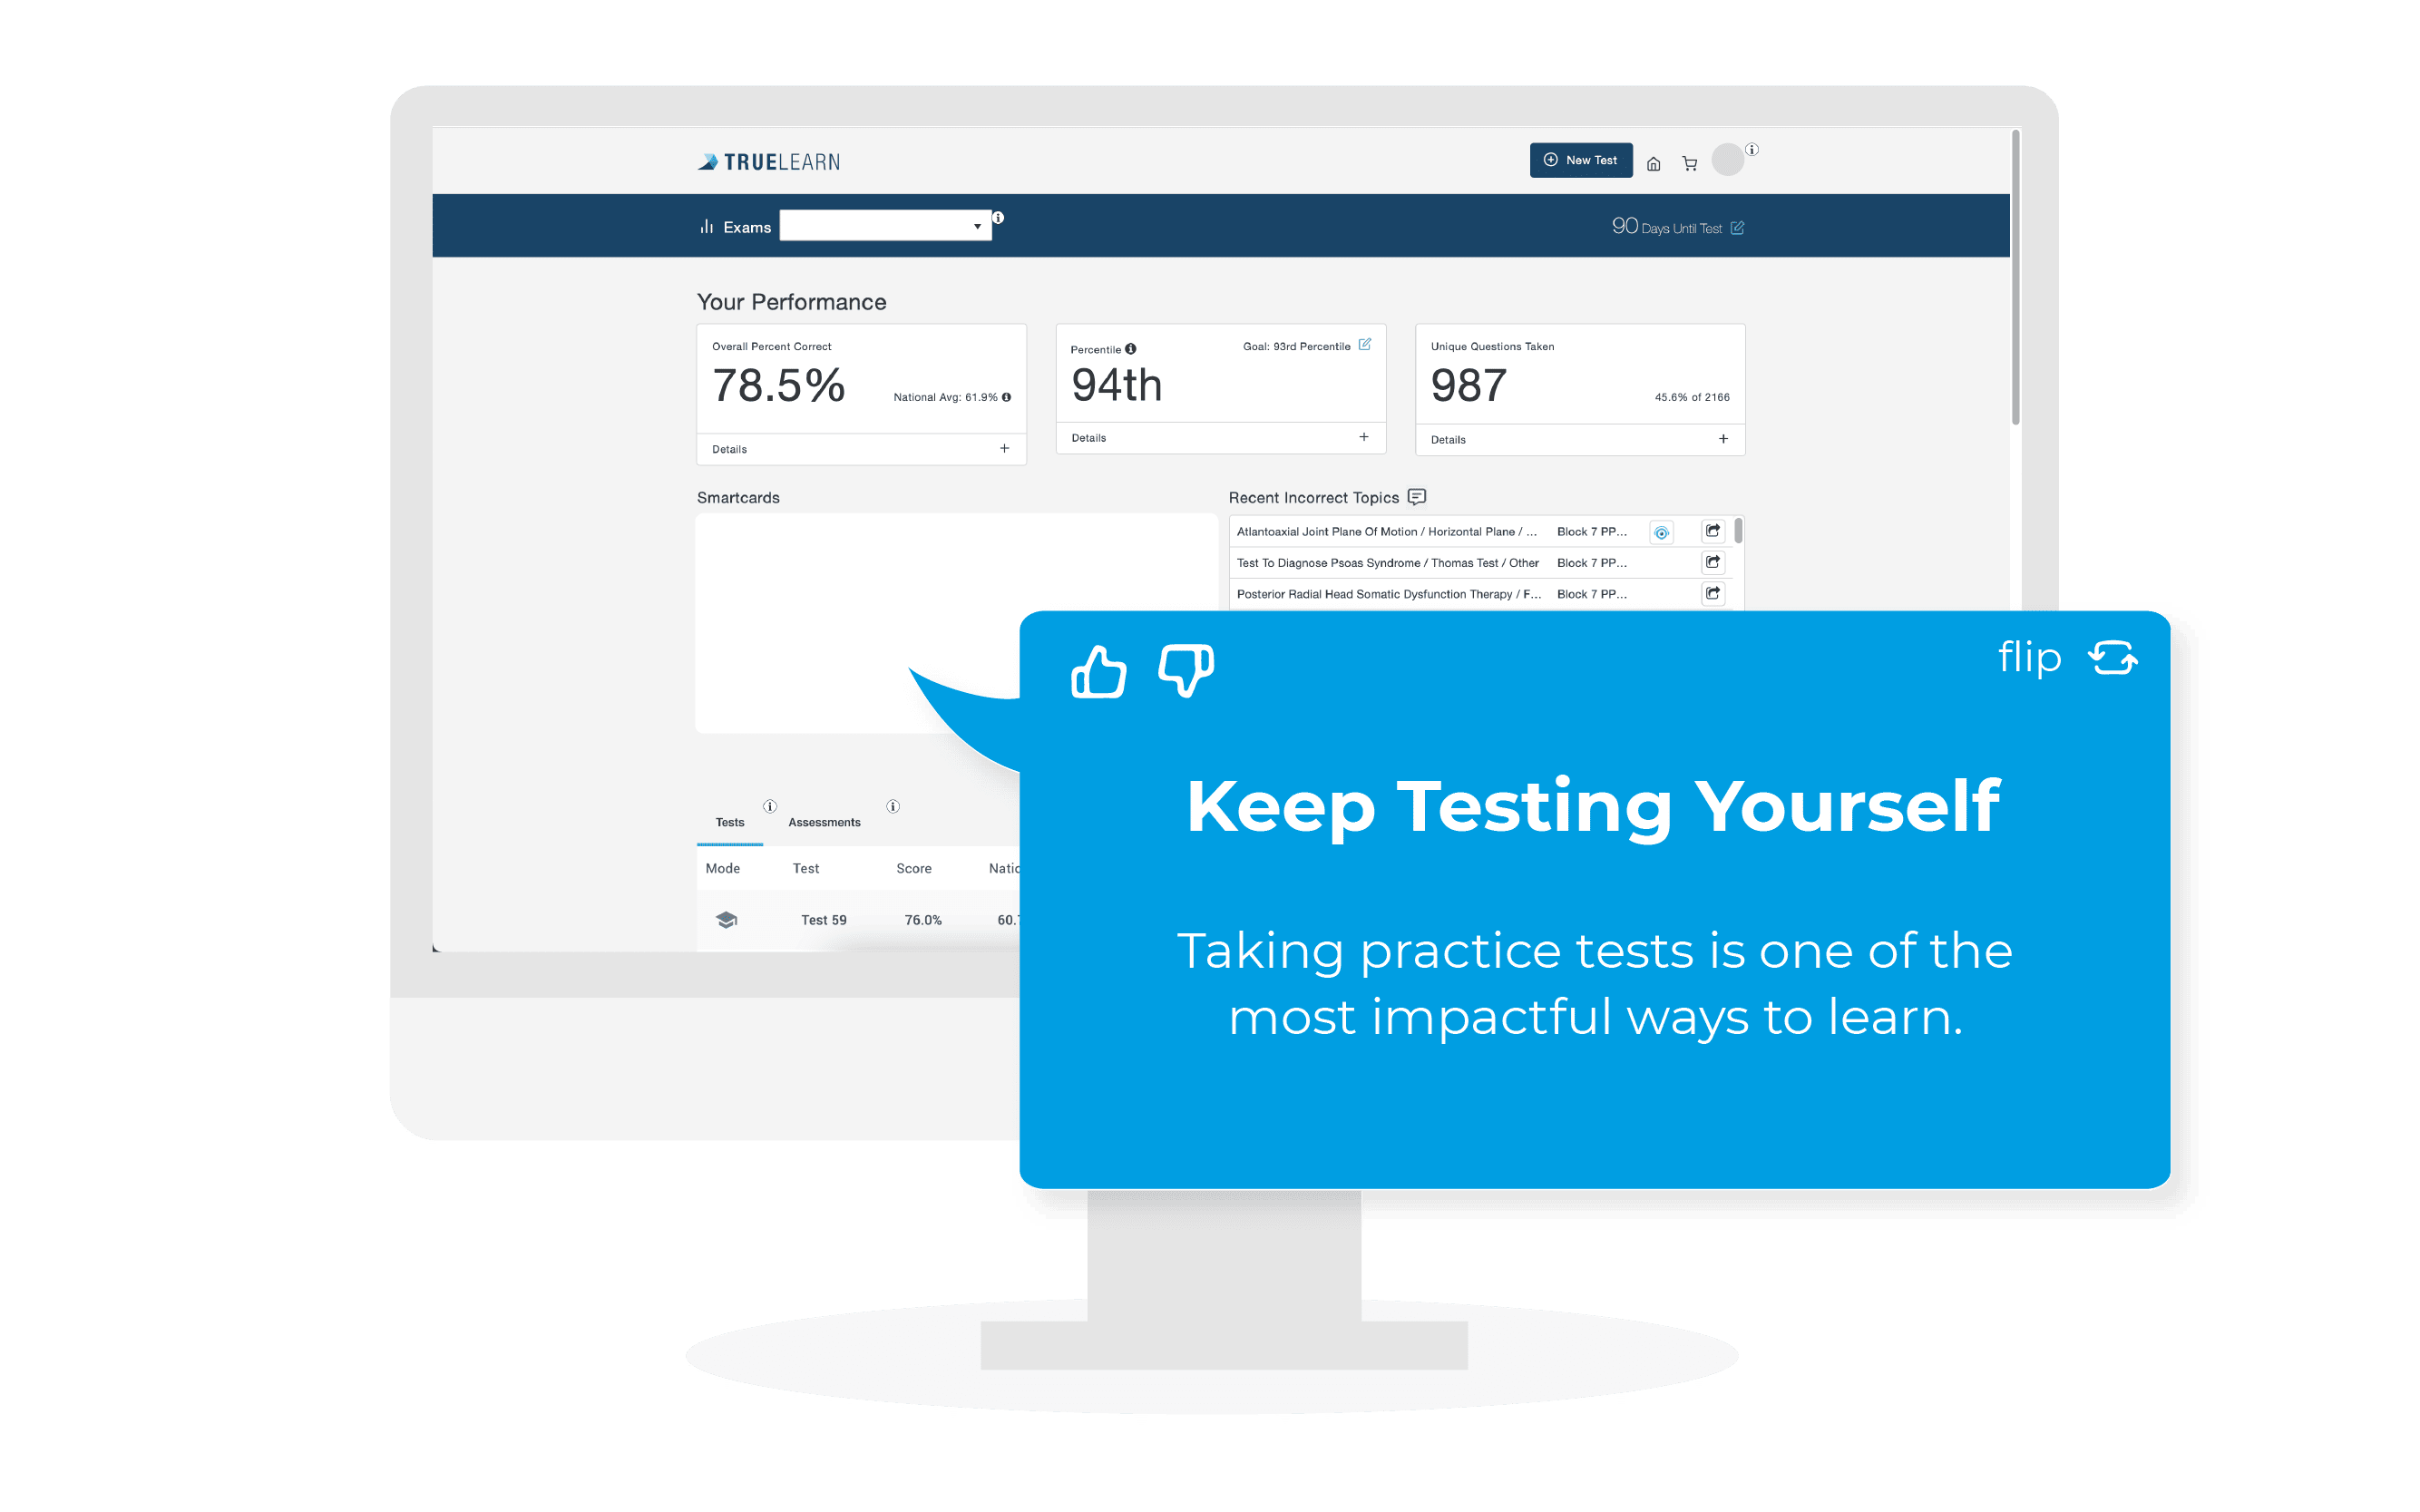 Keep Testing Yourself. Taking practice test is one of the most impactful ways to learn